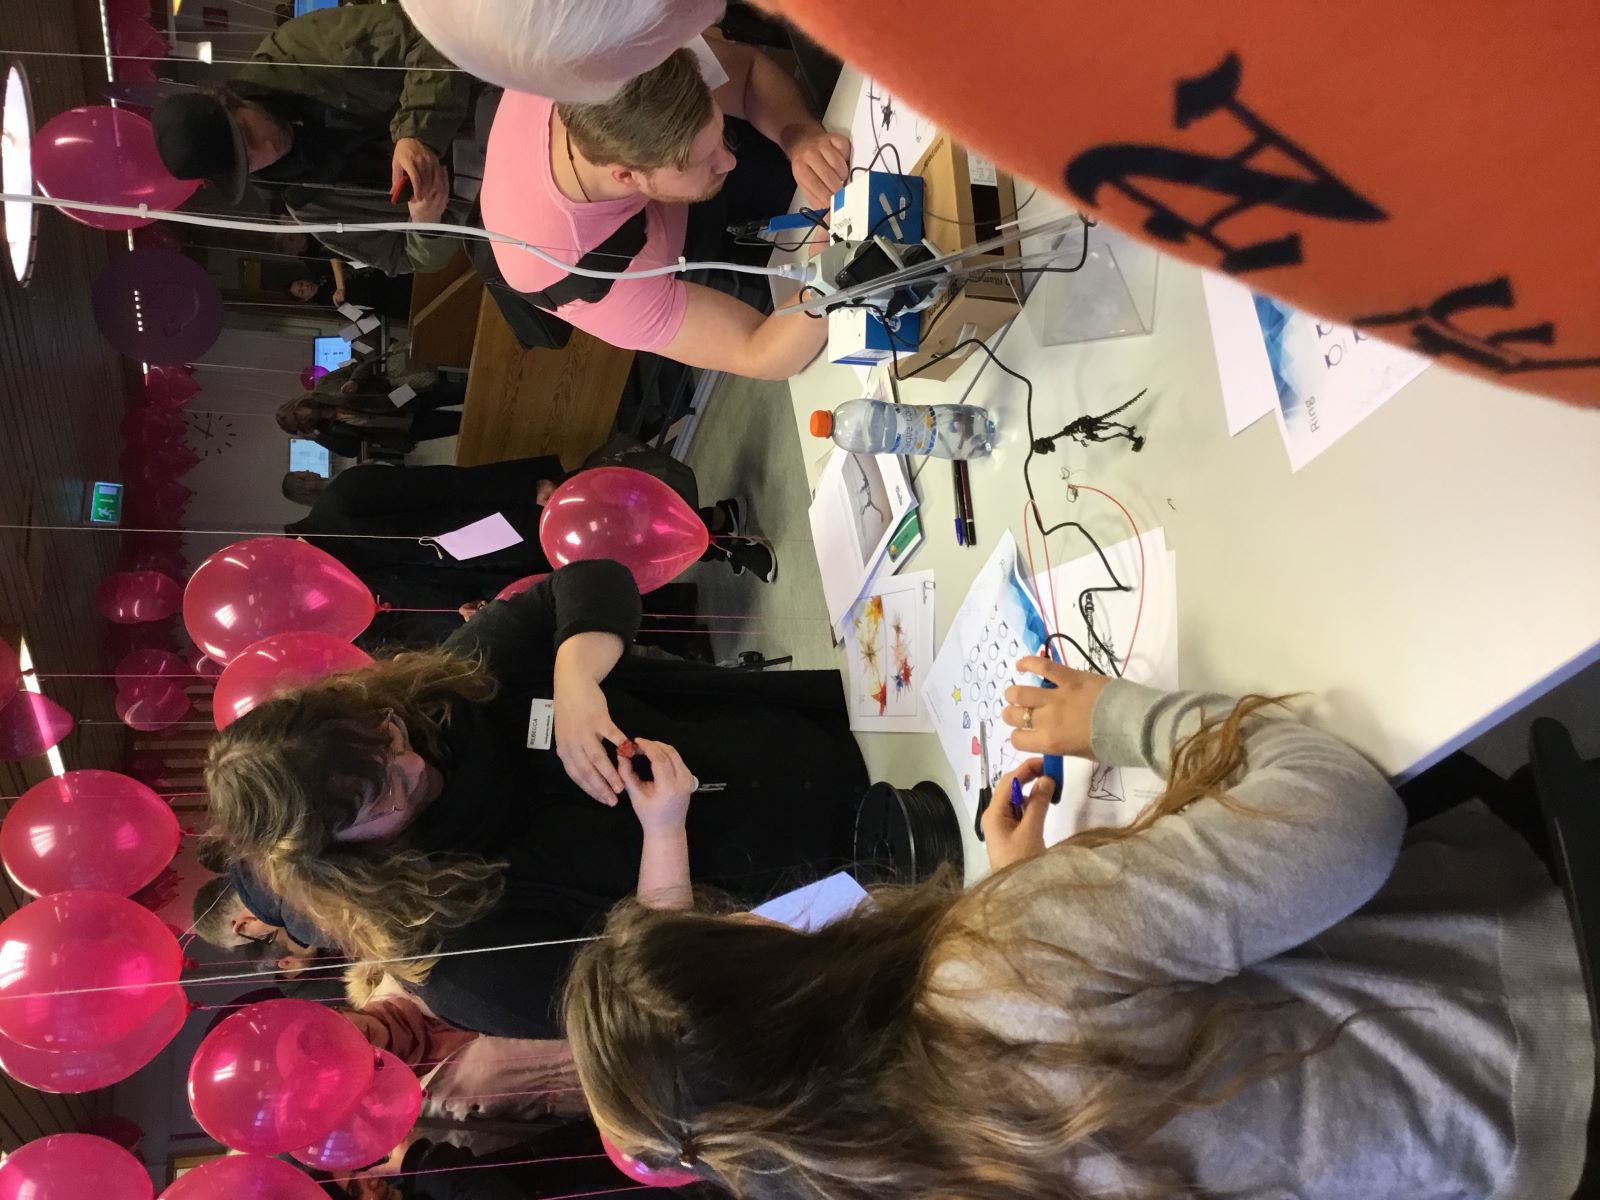 “Visitors at a workshop with 3D pens ” by Helsingborg Public Library is licensed under CC BY 4.0